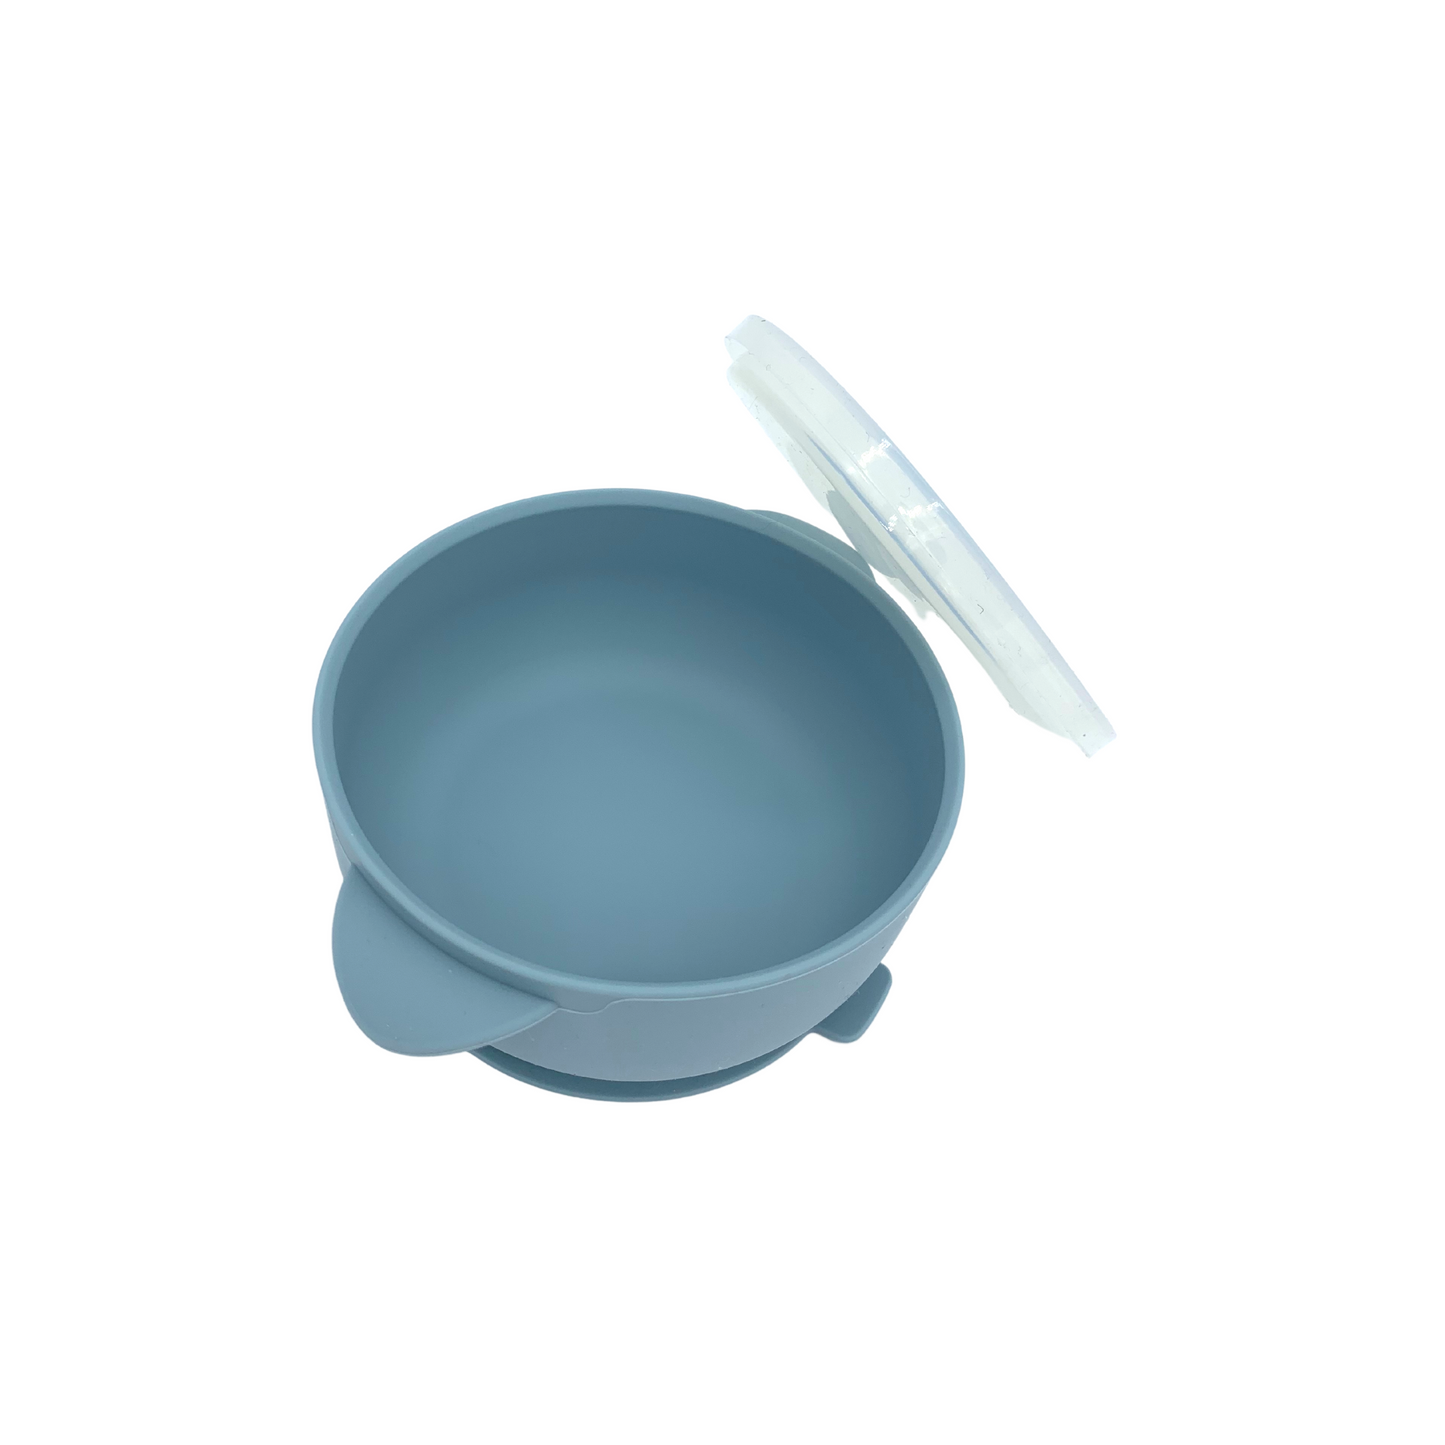 Dusty Blue Suction Bowl and Lid.